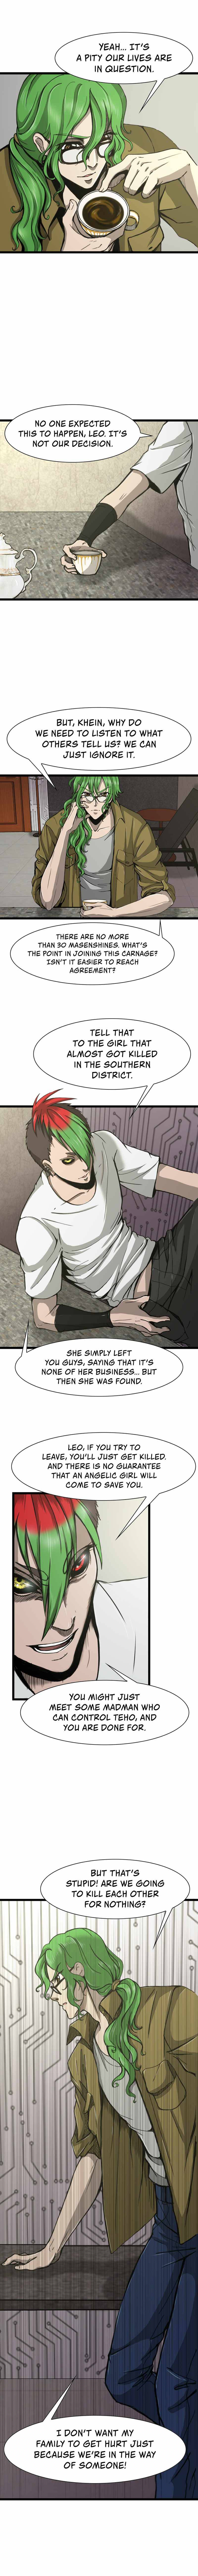 Darkness and Death Chapter 2 - Page 6